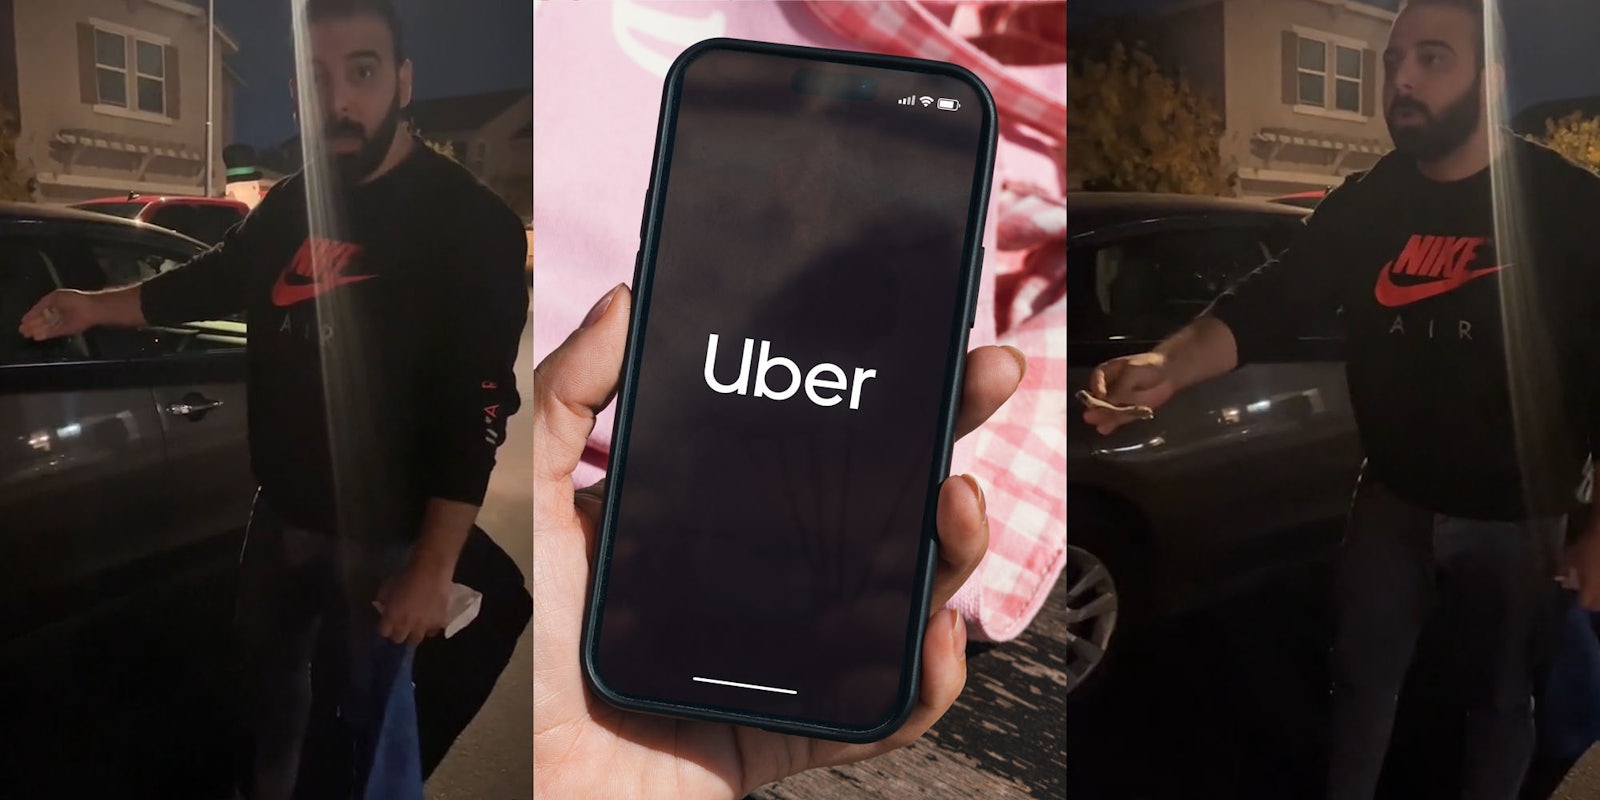 Uber driver speaking holding rag while pointing to car (l) Uber app on phone in hand in front of pink fabric and wooden background (c) Uber driver speaking holding rag in one hand and reaching out other with cash in it while standing next to car (r)